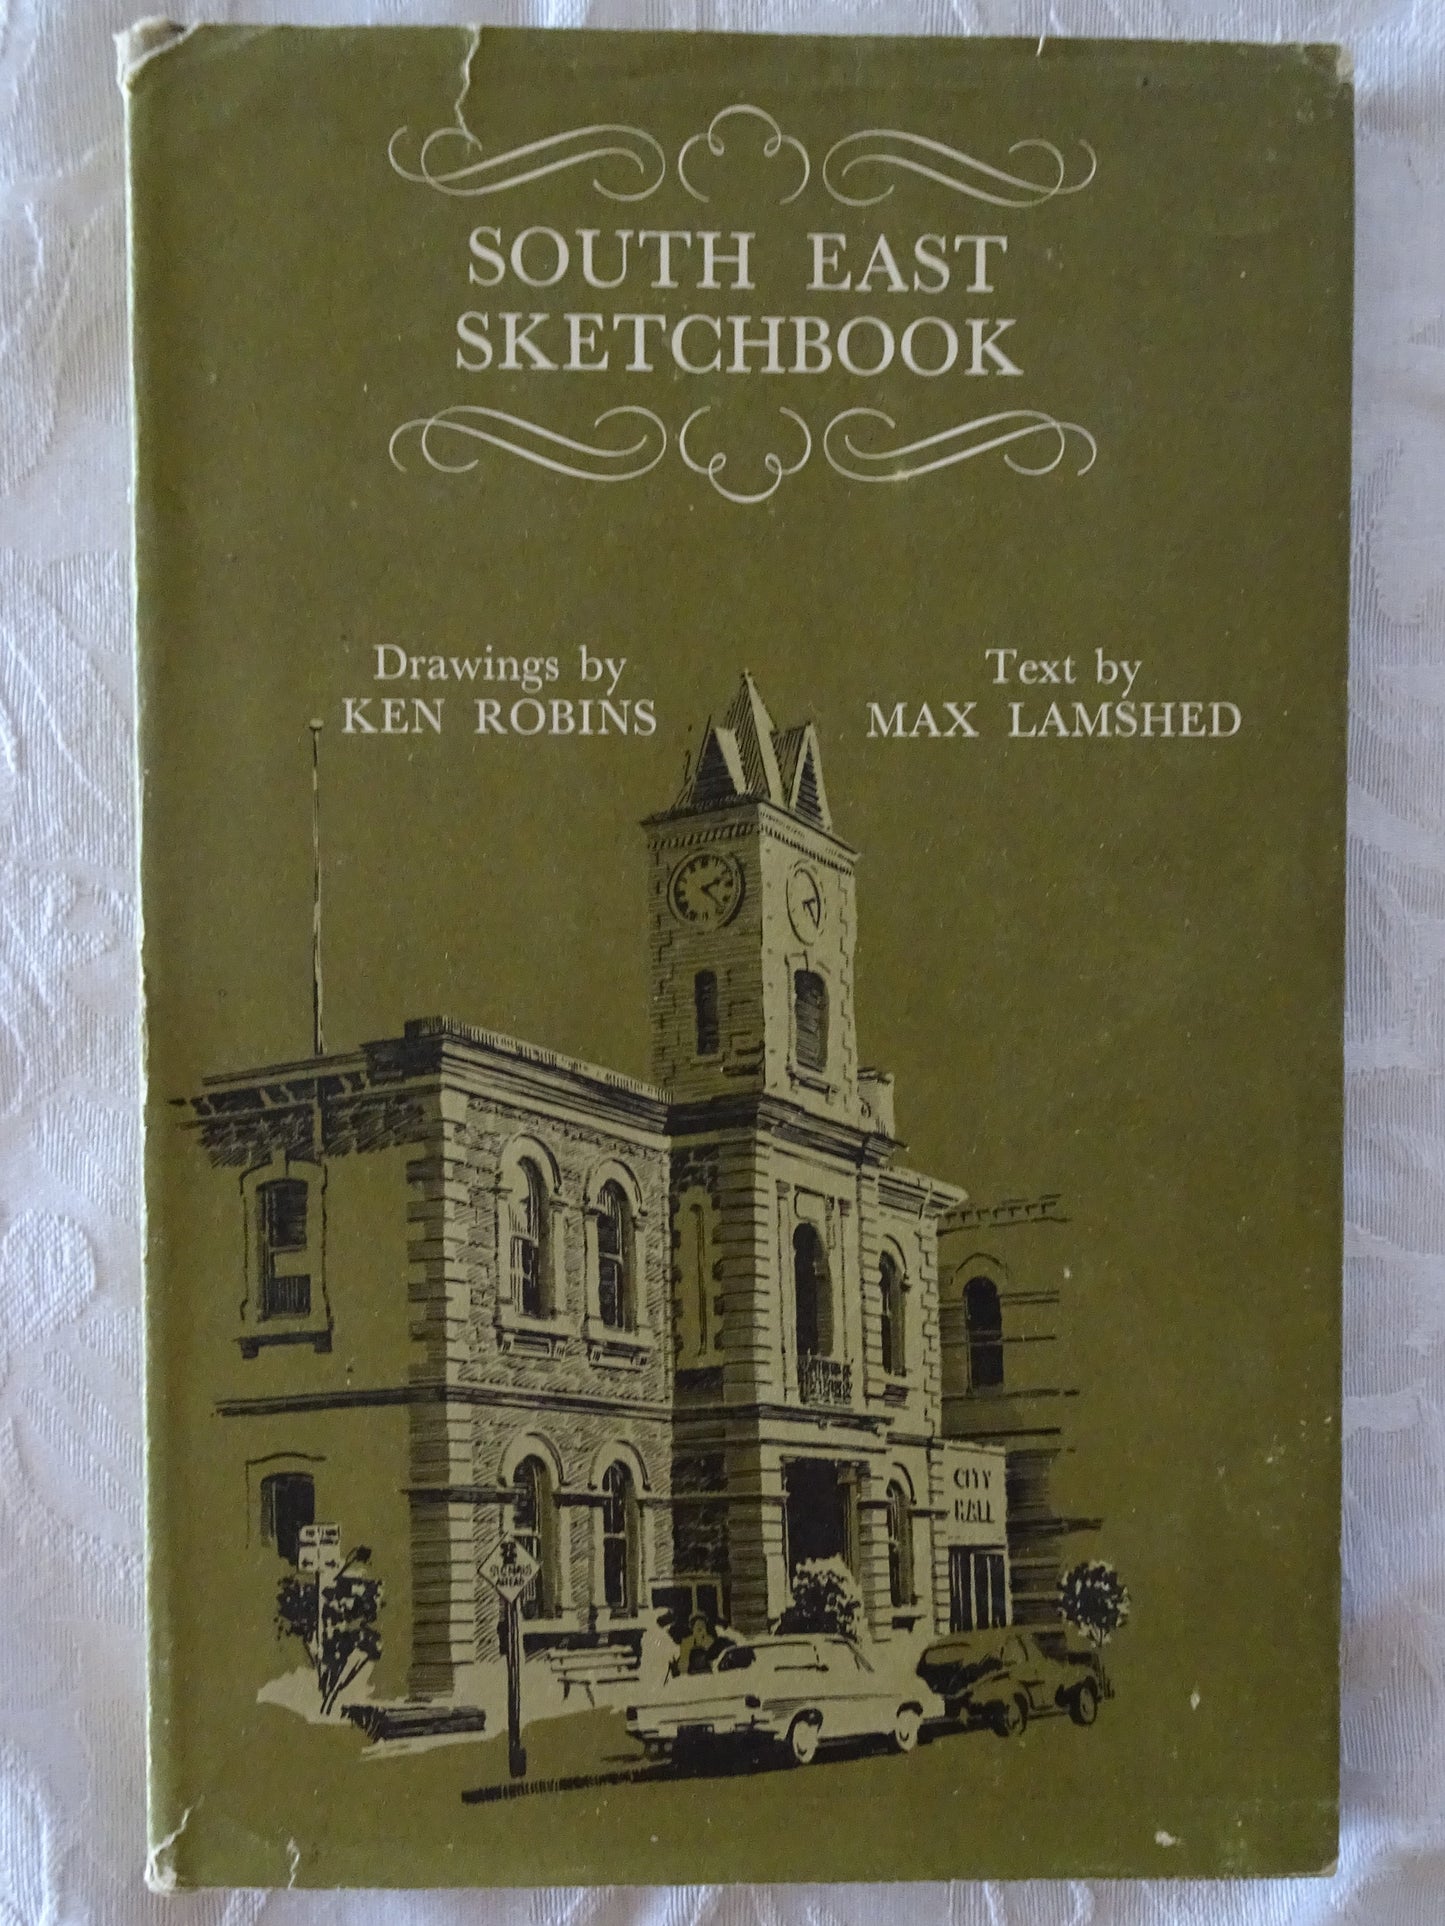 South East Sketchbook  Drawings by Ken Robins and Text by Max Lamshed